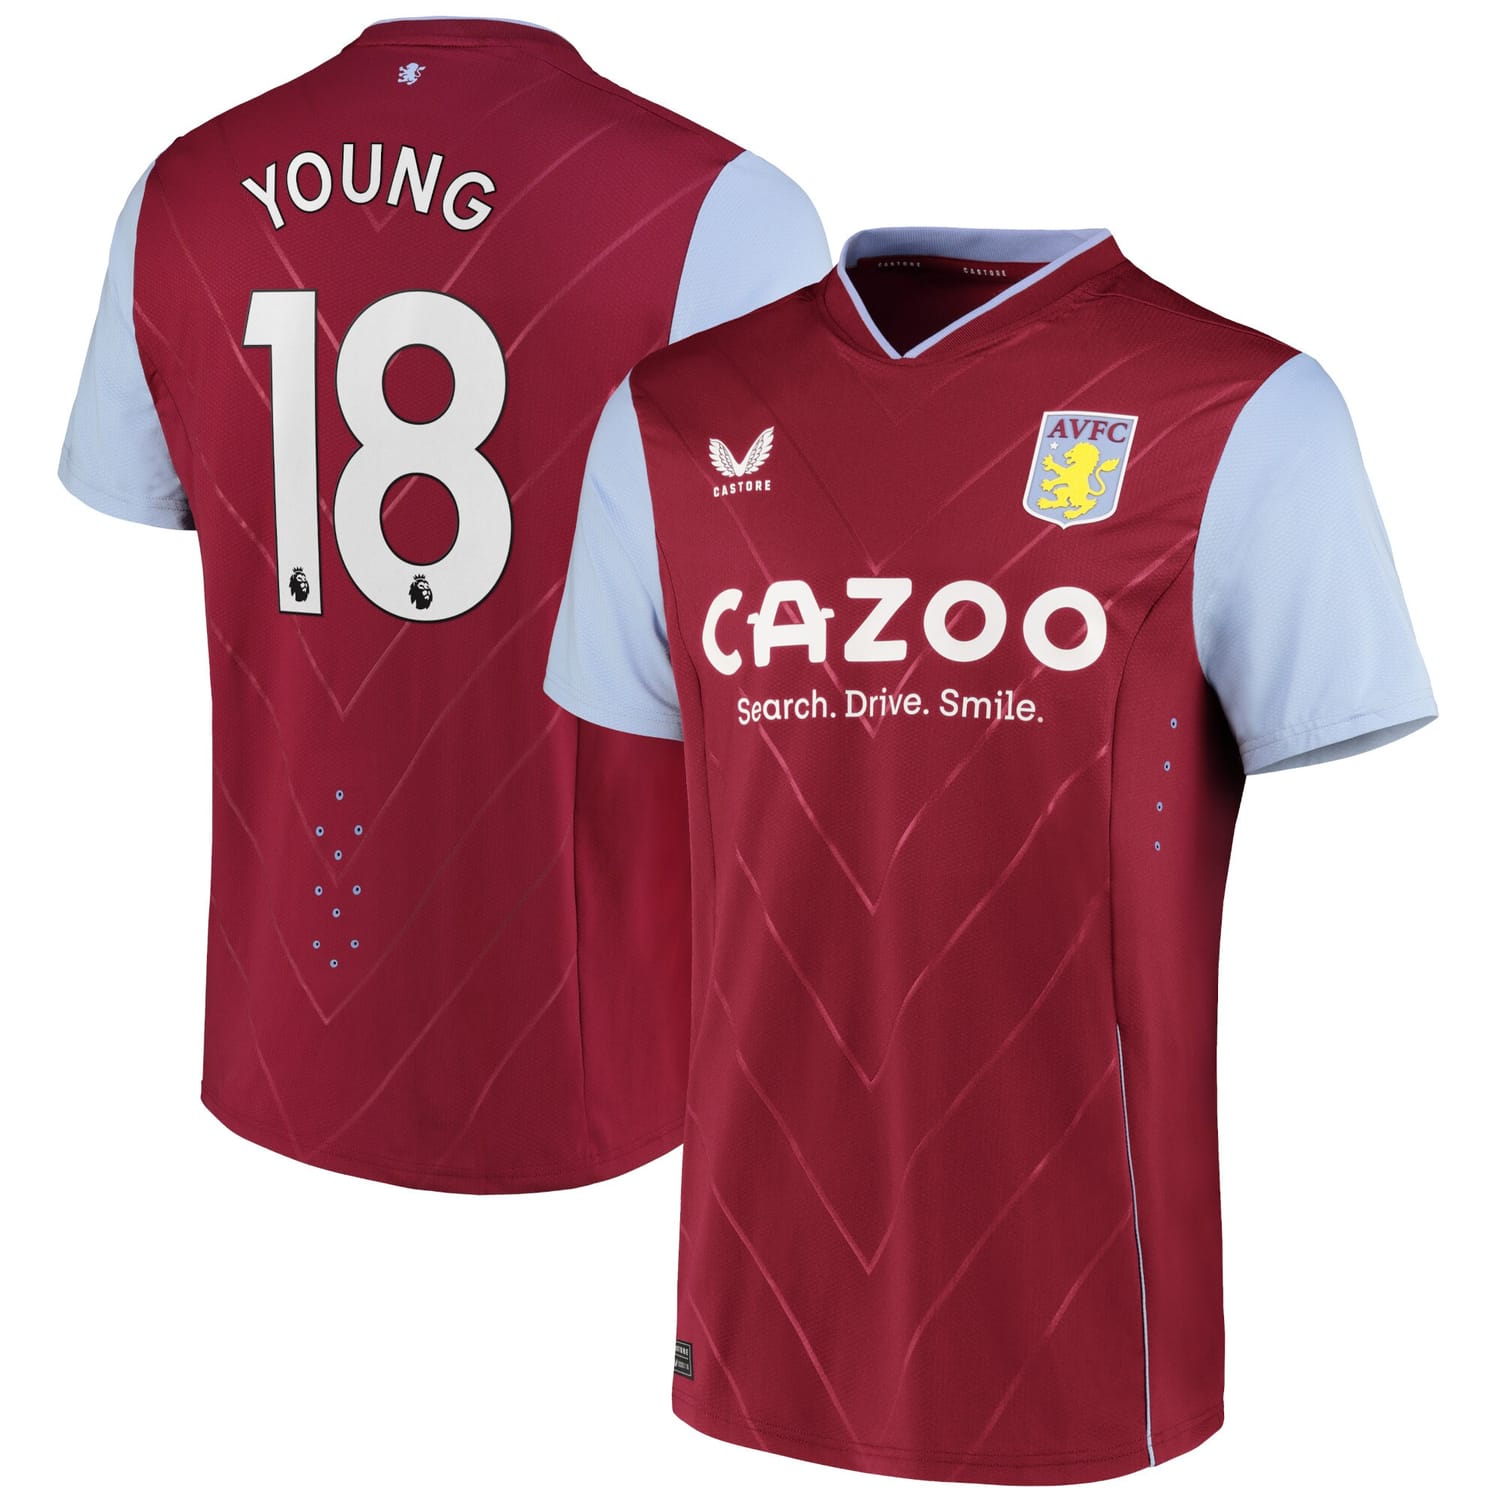 Premier League Ast. Villa Home Pro Jersey Shirt 2022-23 player Ashley Young 18 printing for Men